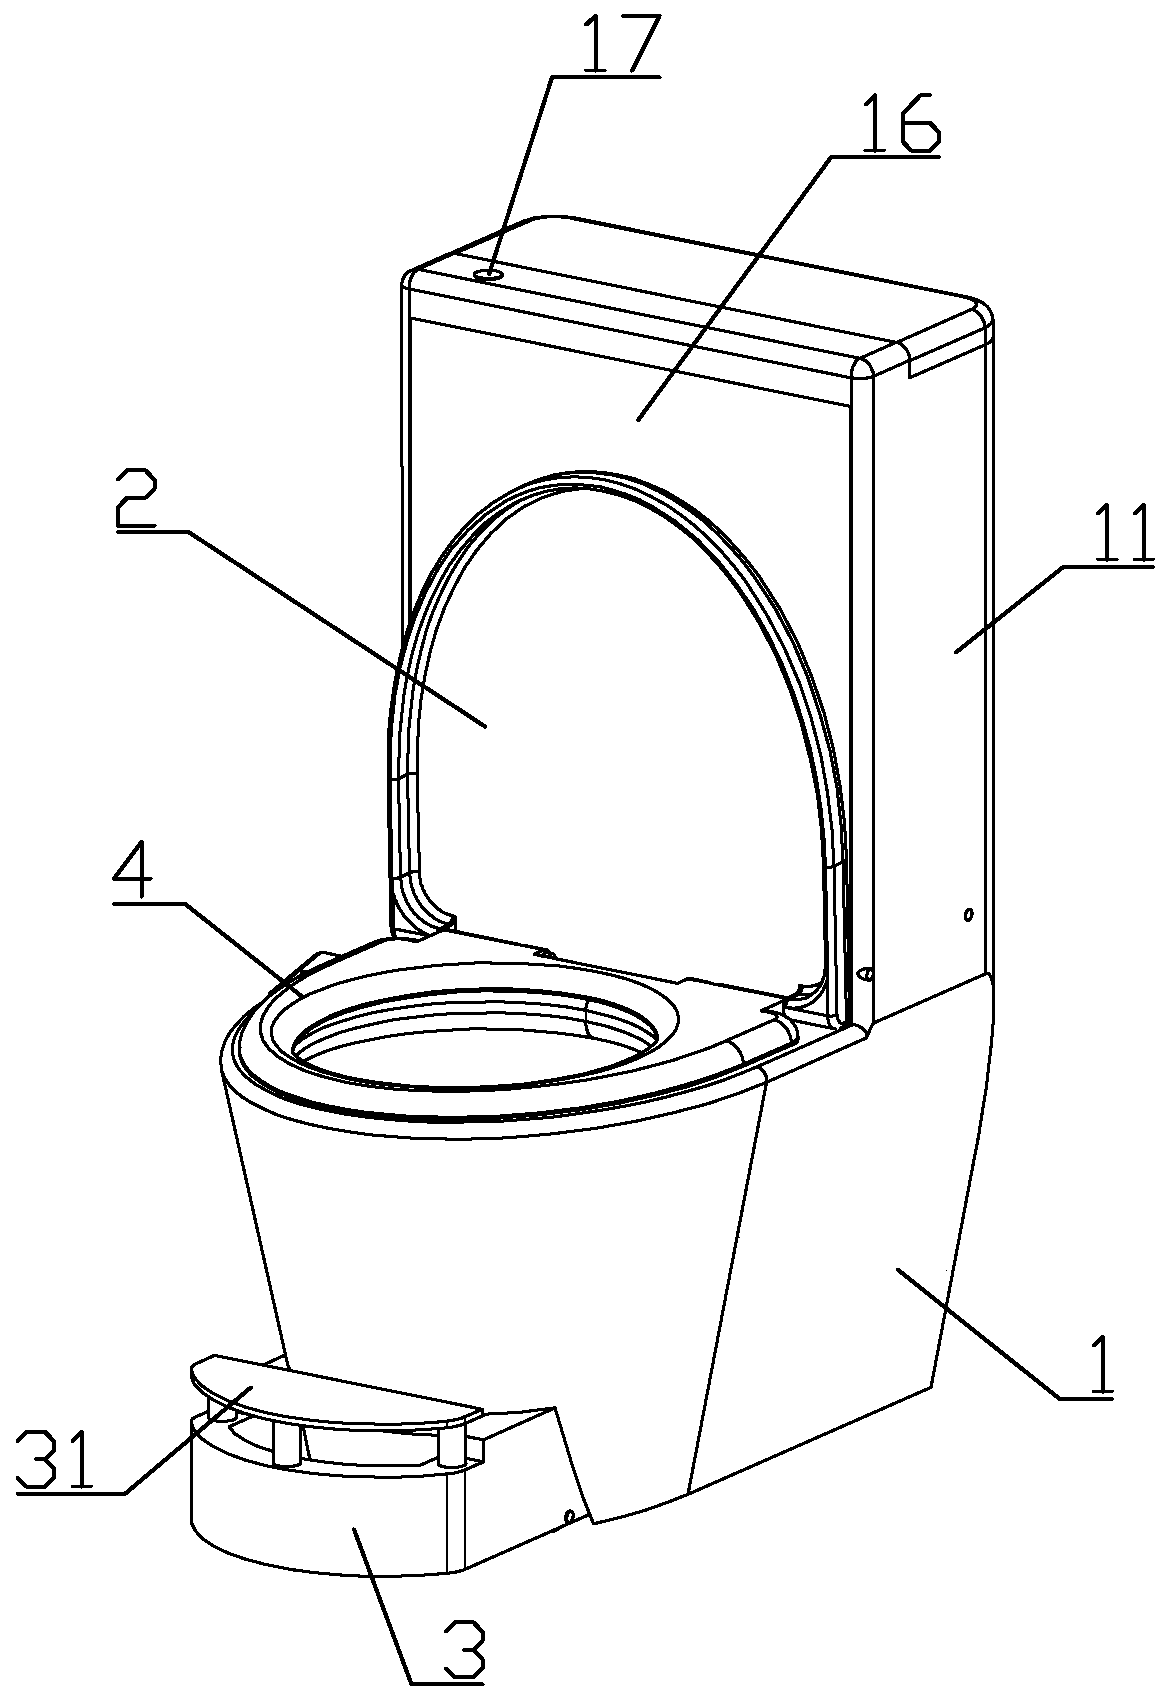 A multifunctional toilet